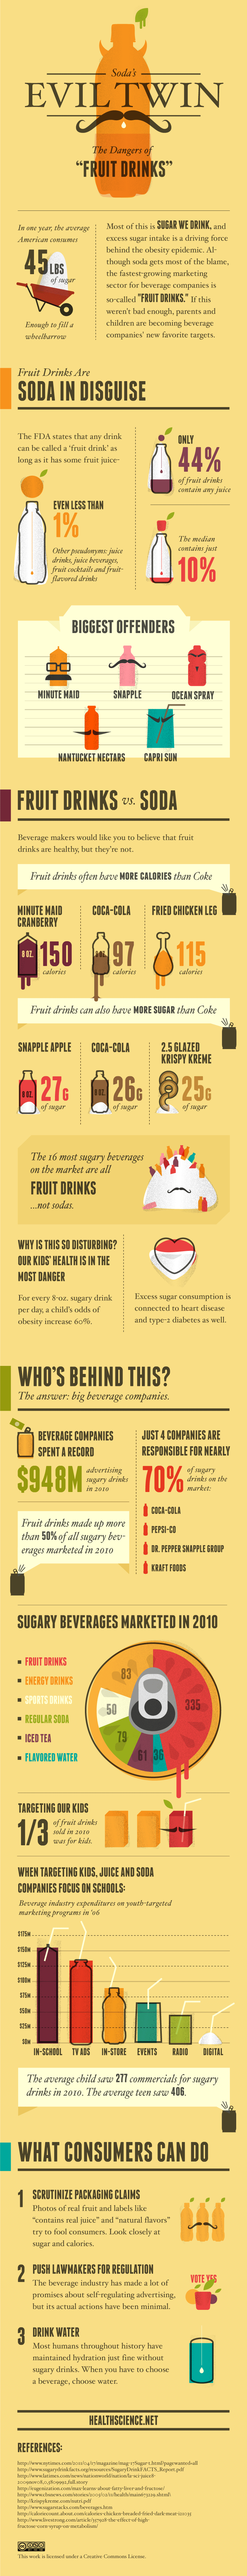 Soda's Evil Twin: The Dangers of Fruit Drinks  Infographic